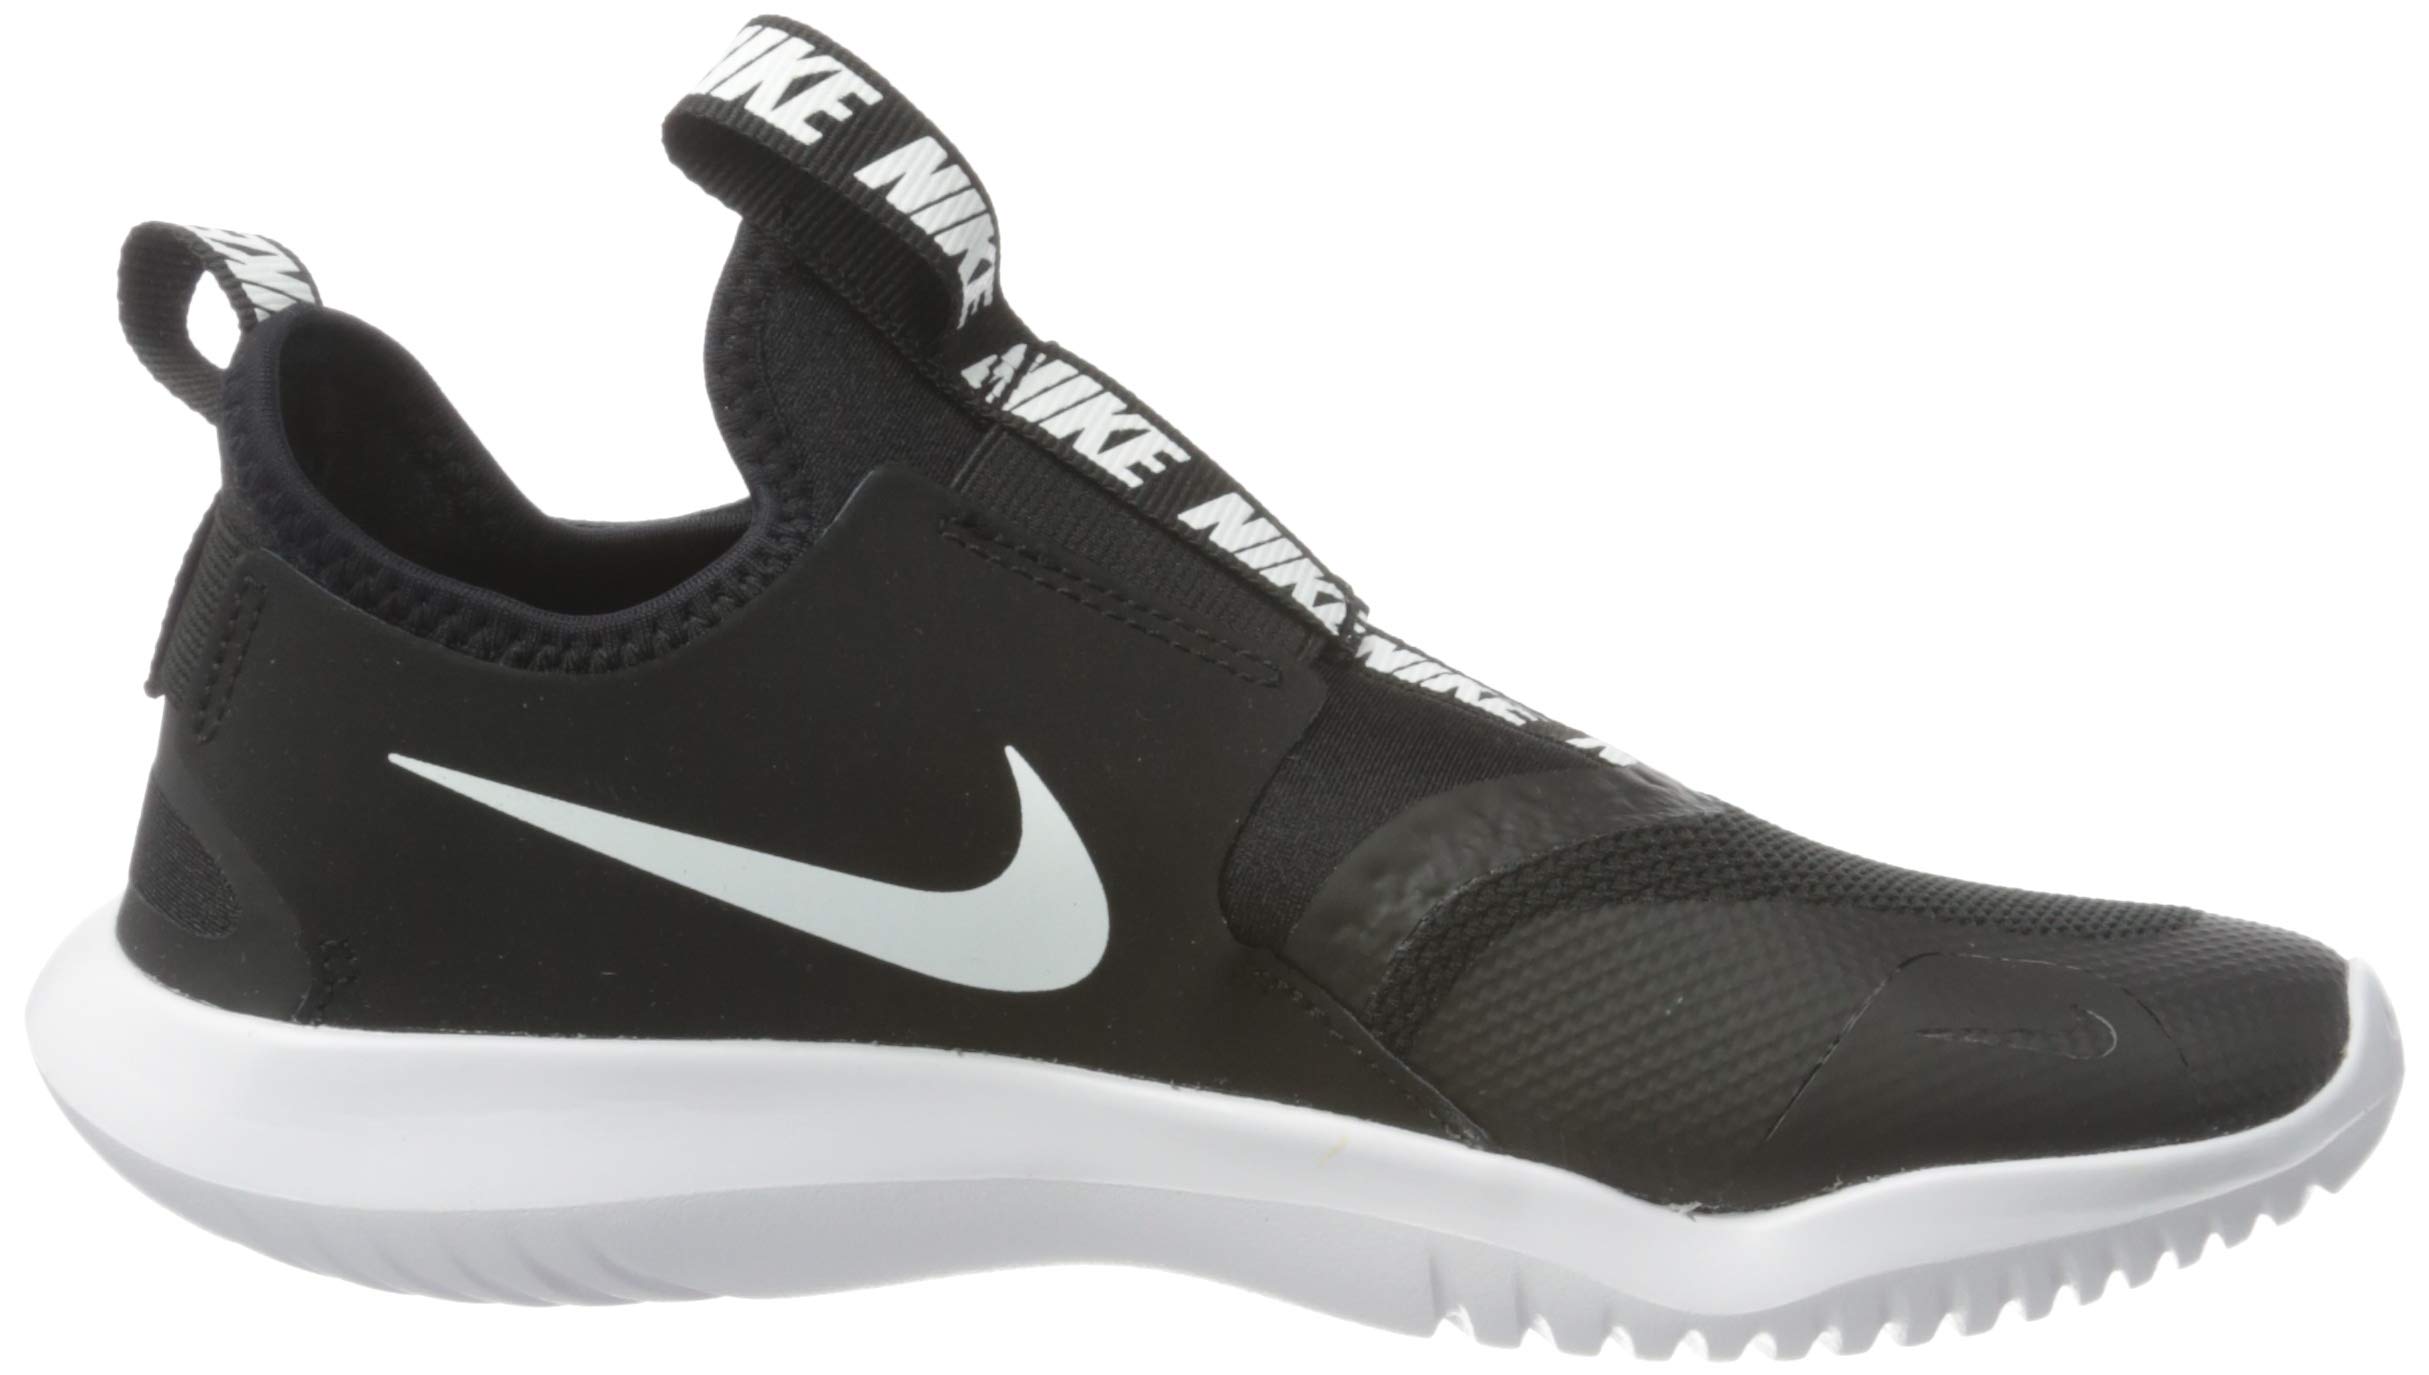 Nike Youth Flex Runner GS AT4662 609 - Size